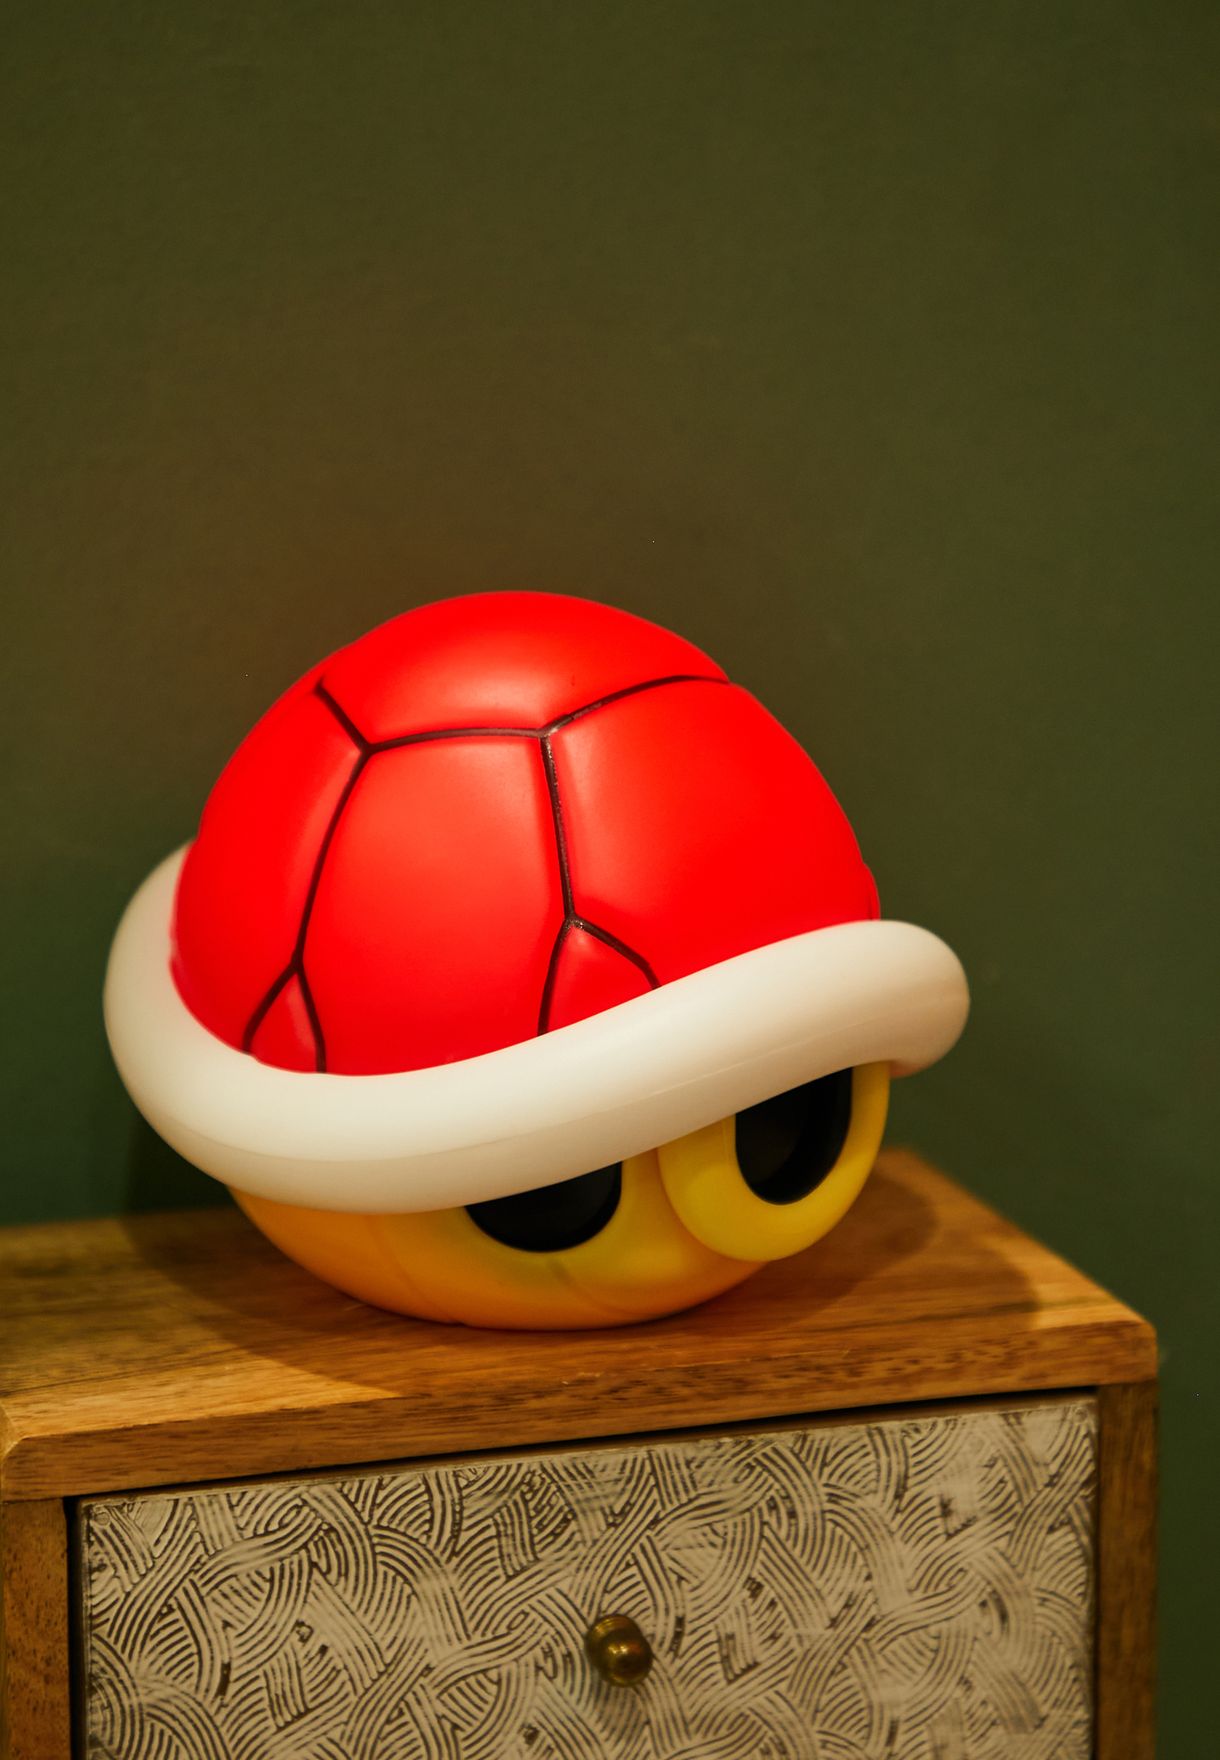 Super Mario Red Shell Light With Sound